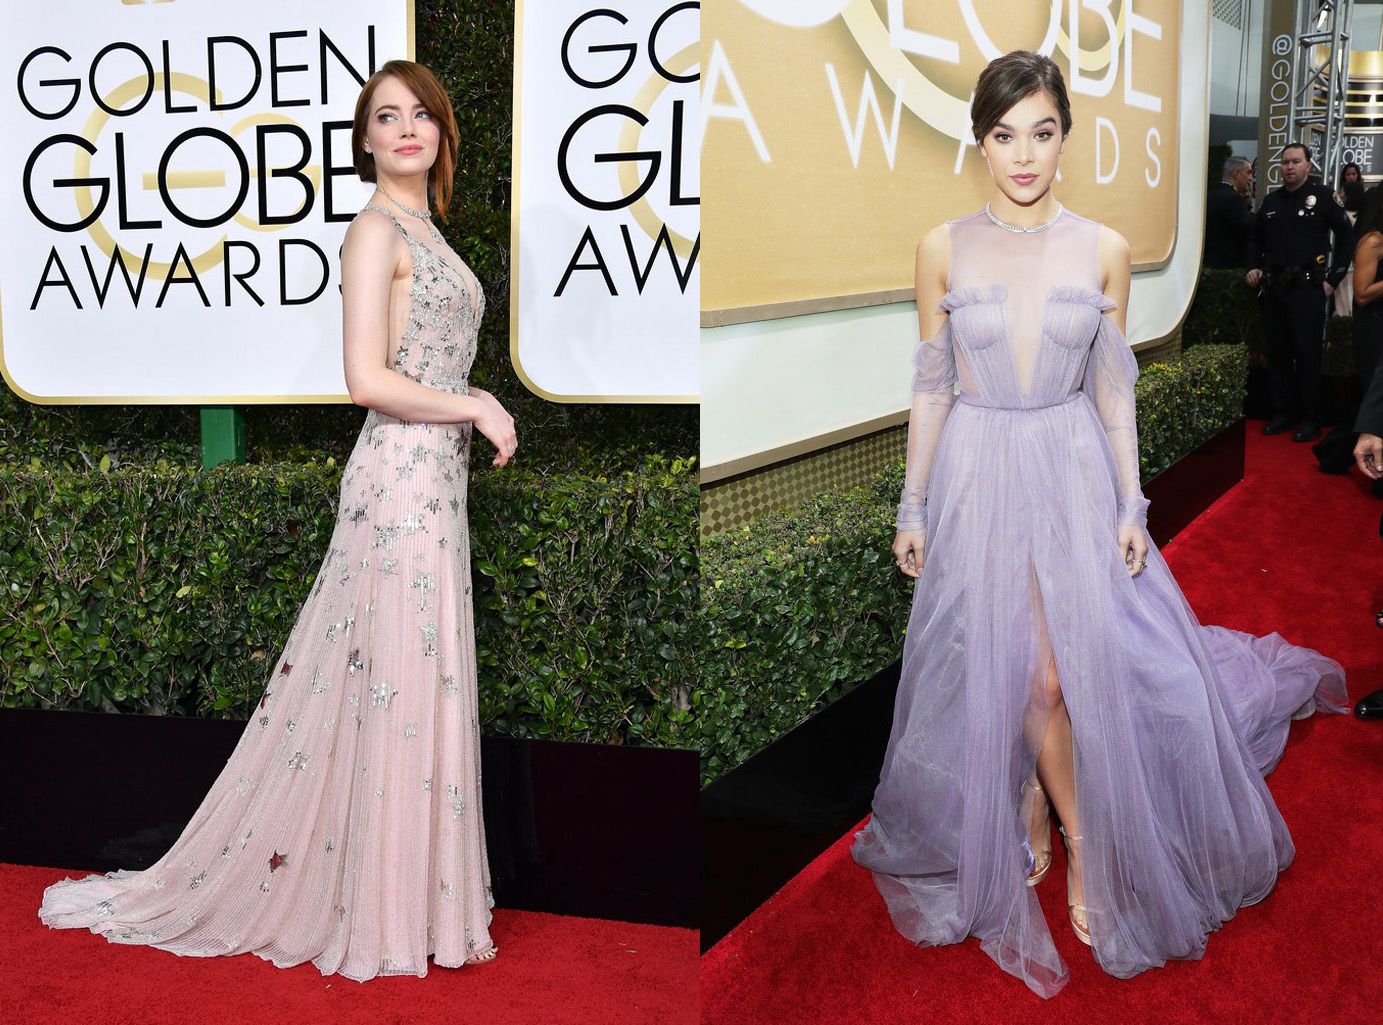 The Glamorous Style of Celebrities on the Red Carpet of the 2017 Golden Globe Awards